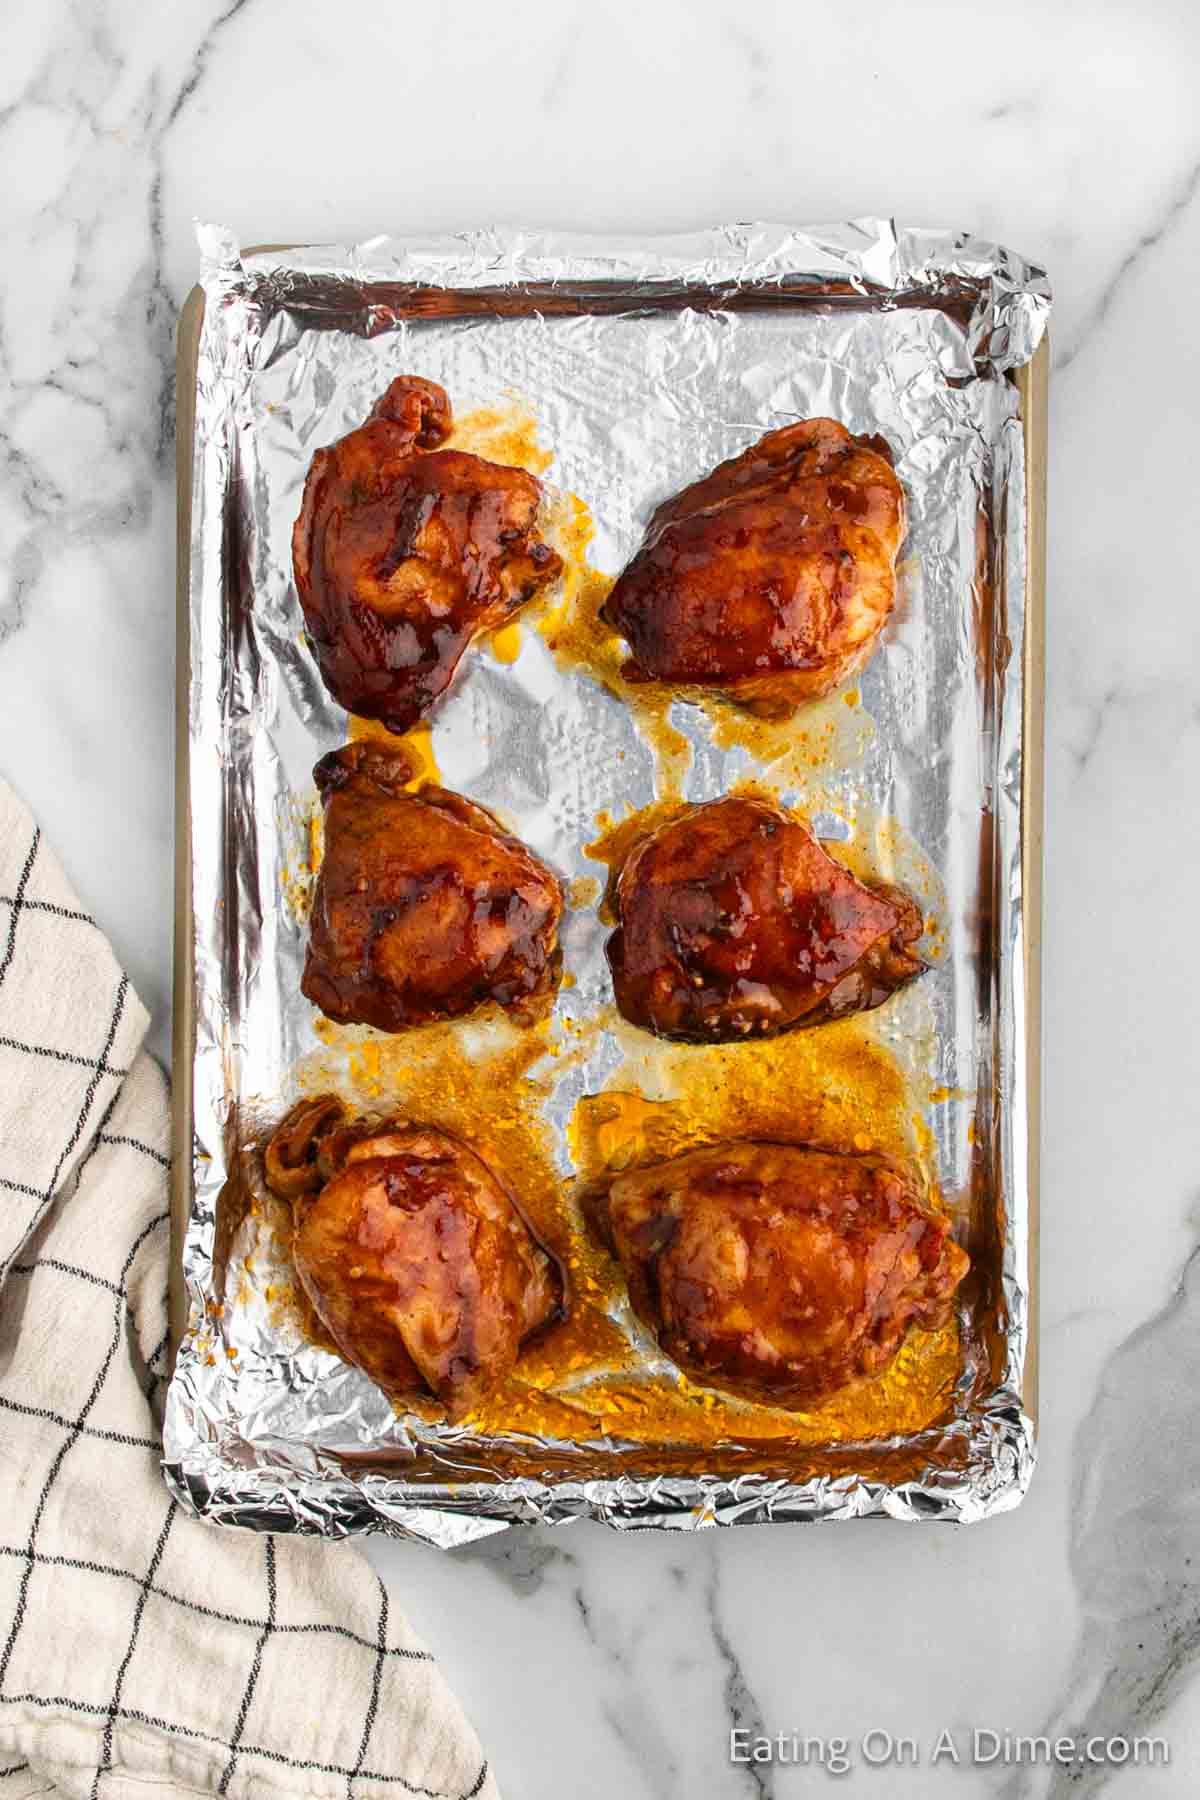 Placing the chicken thighs on a baking sheet and broil